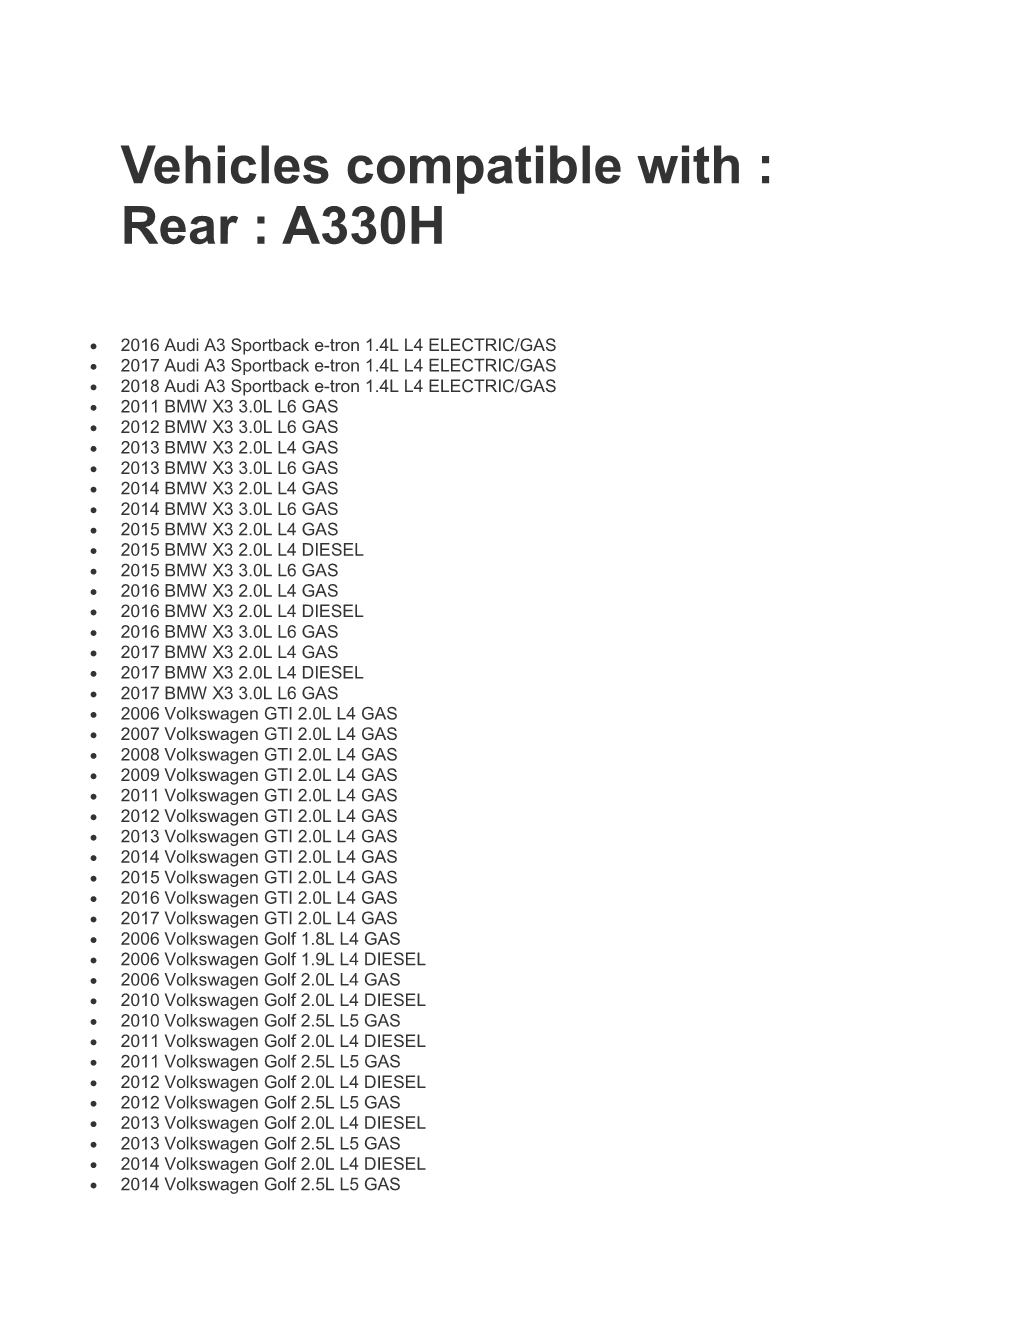 Vehicles Compatible with : Rear : A330H